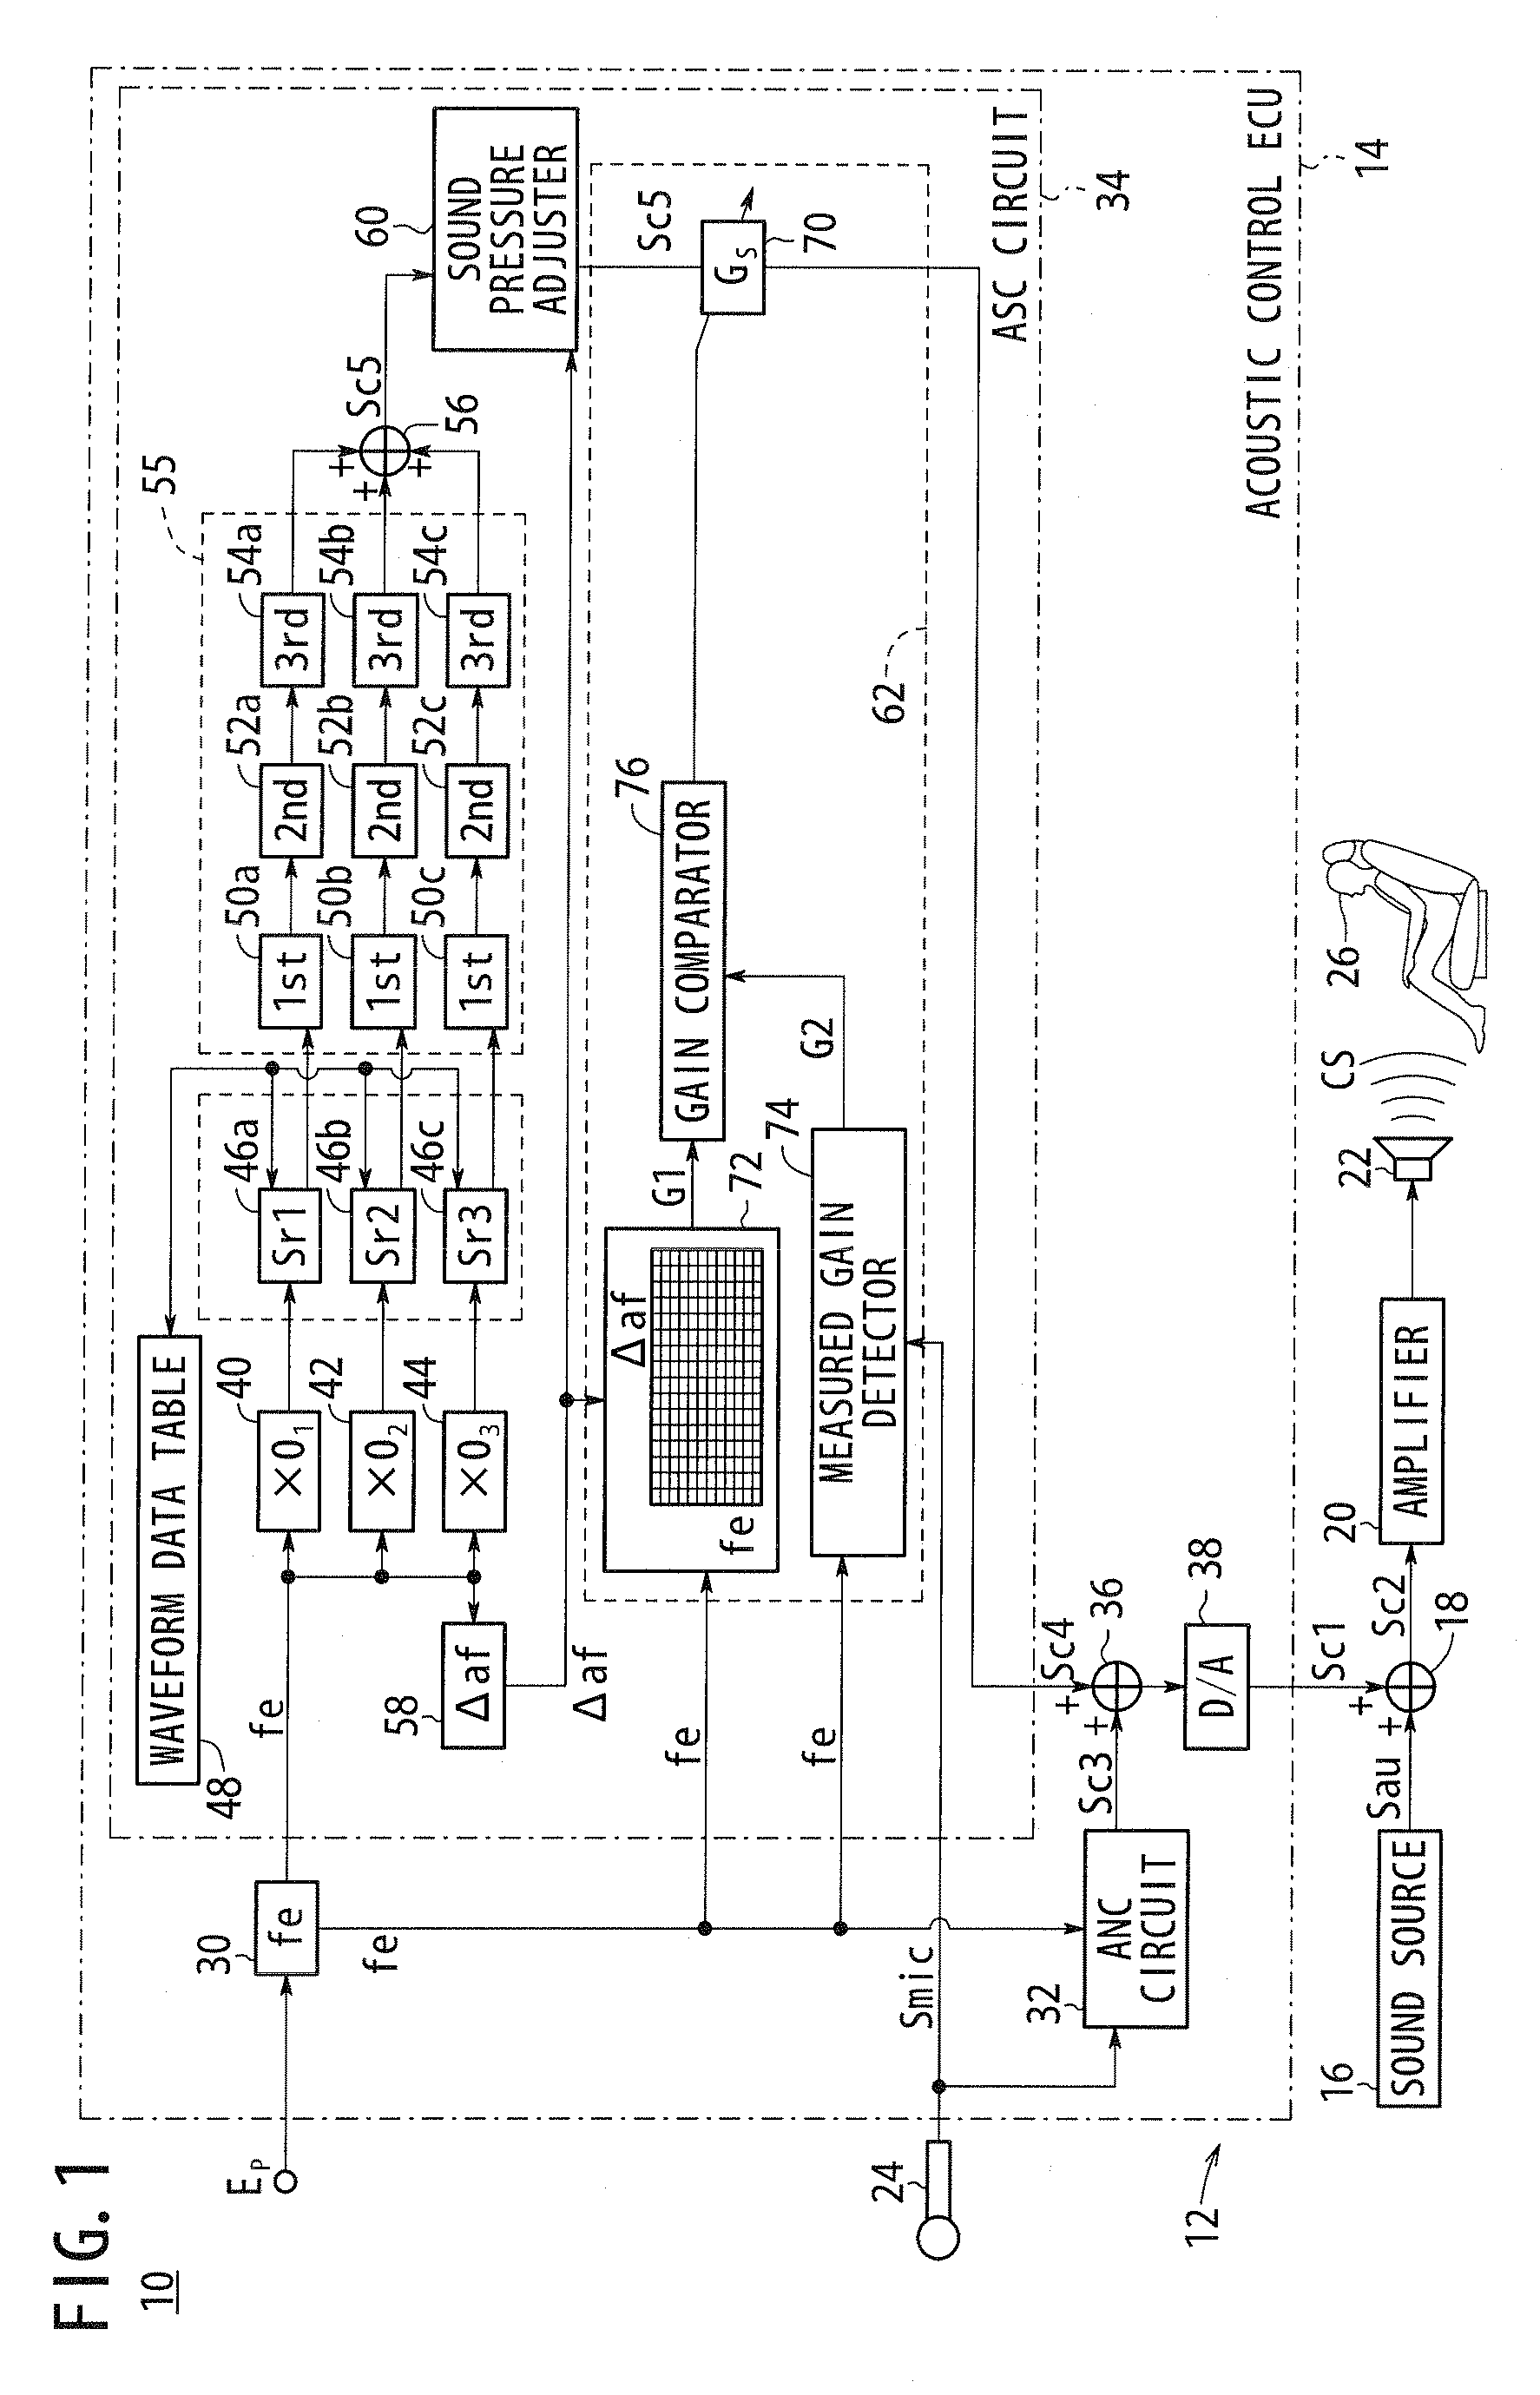 Sound effect generating device